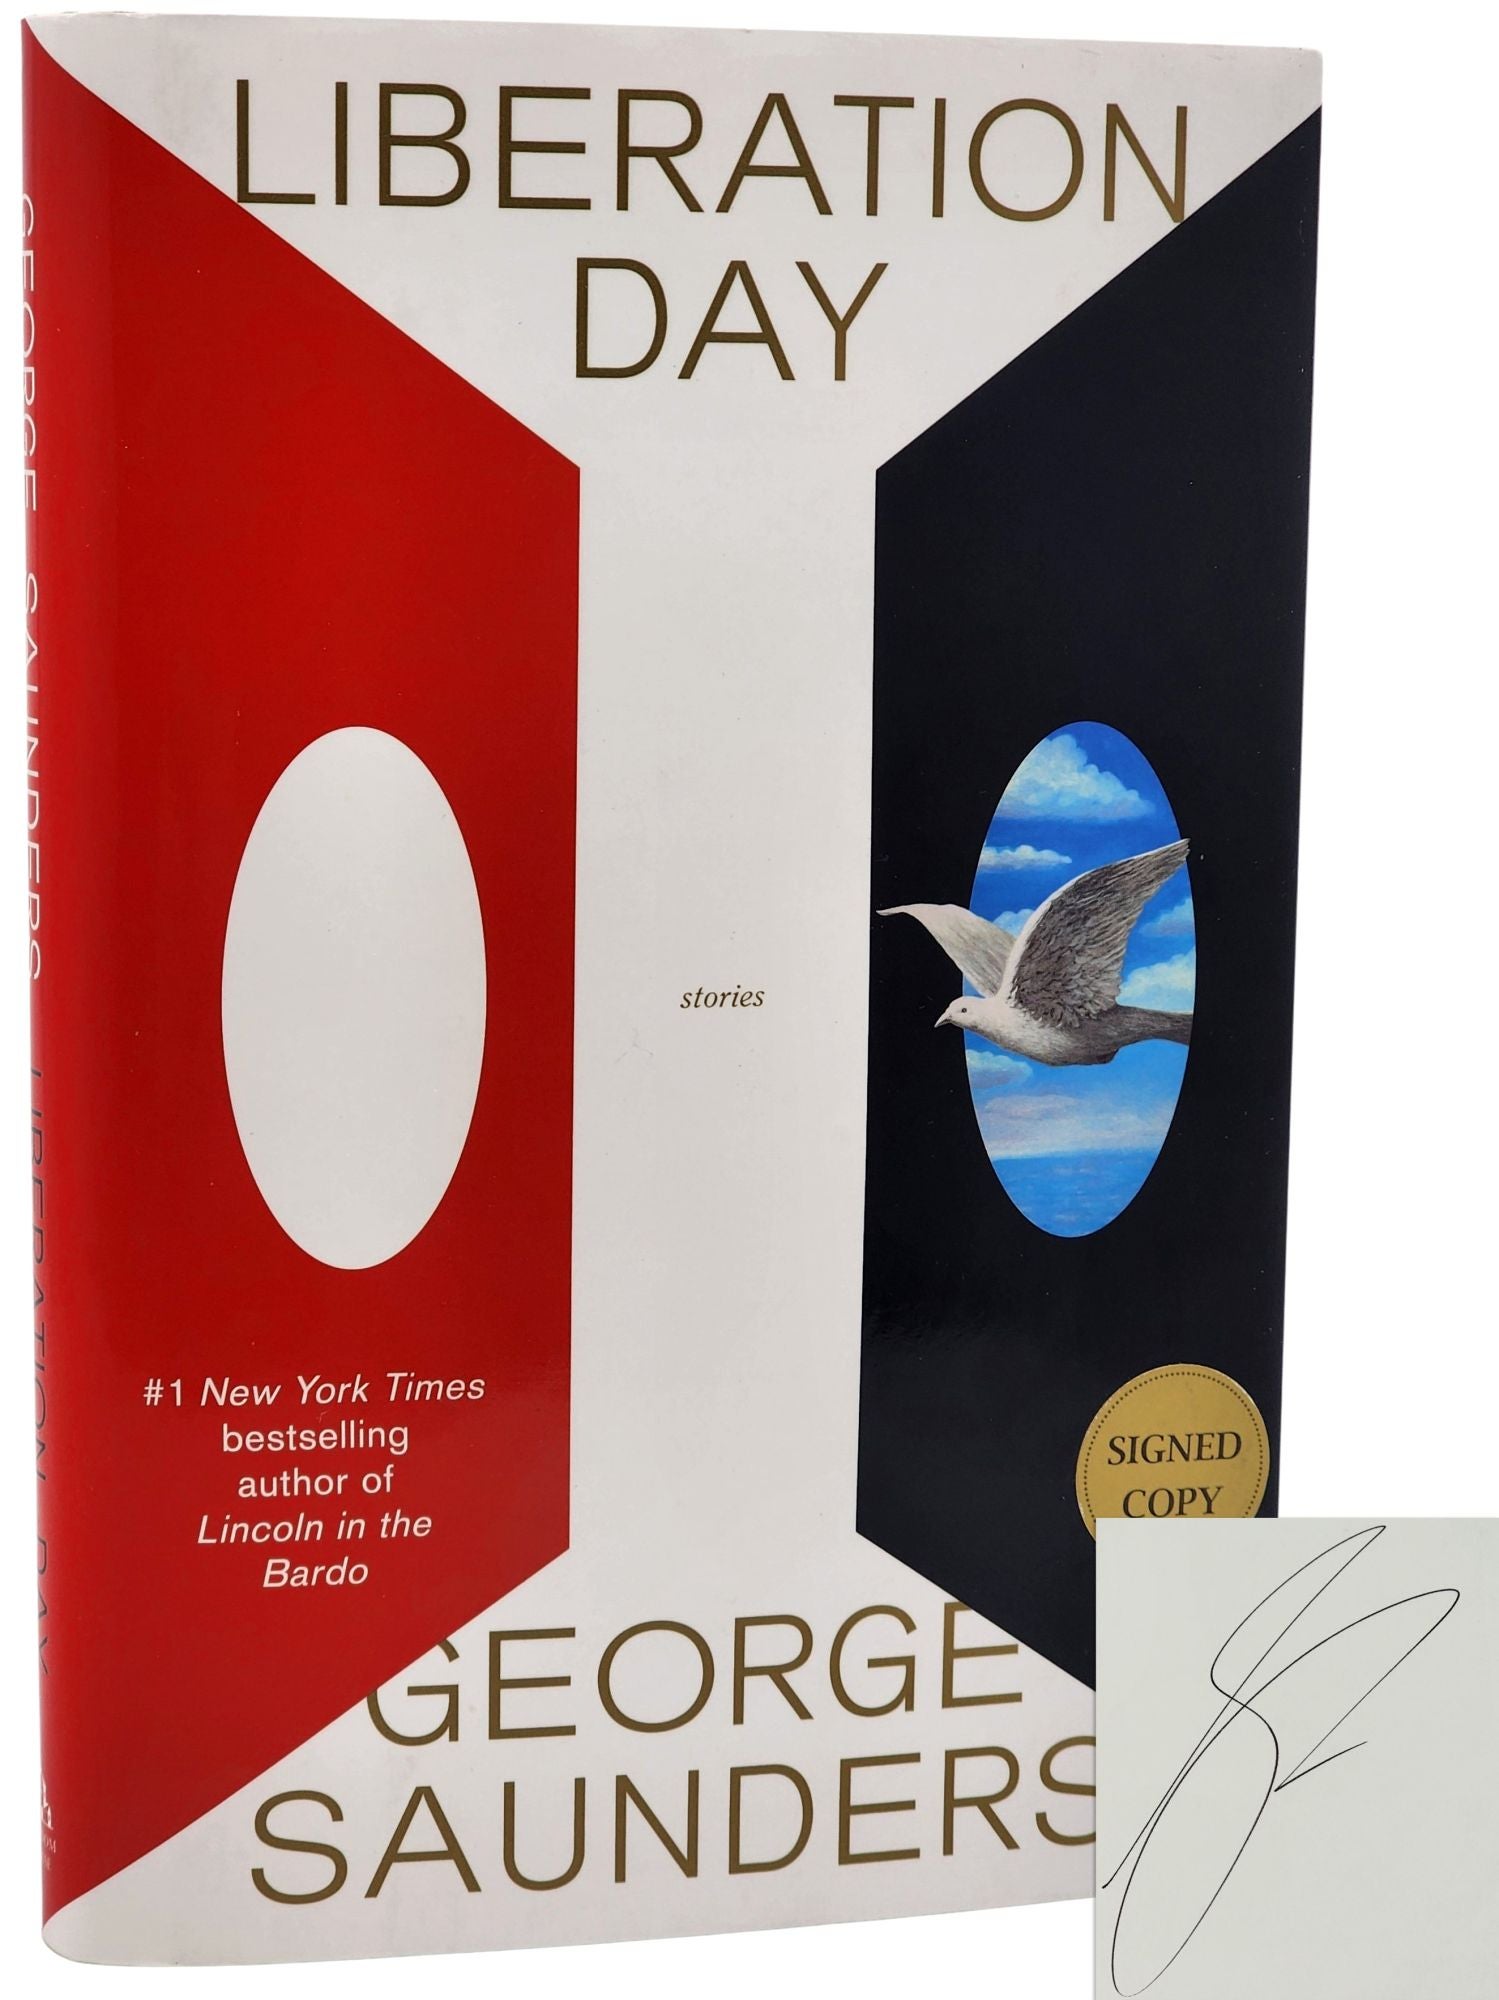 [Book #50943] LIBERATION DAY. George Saunders.